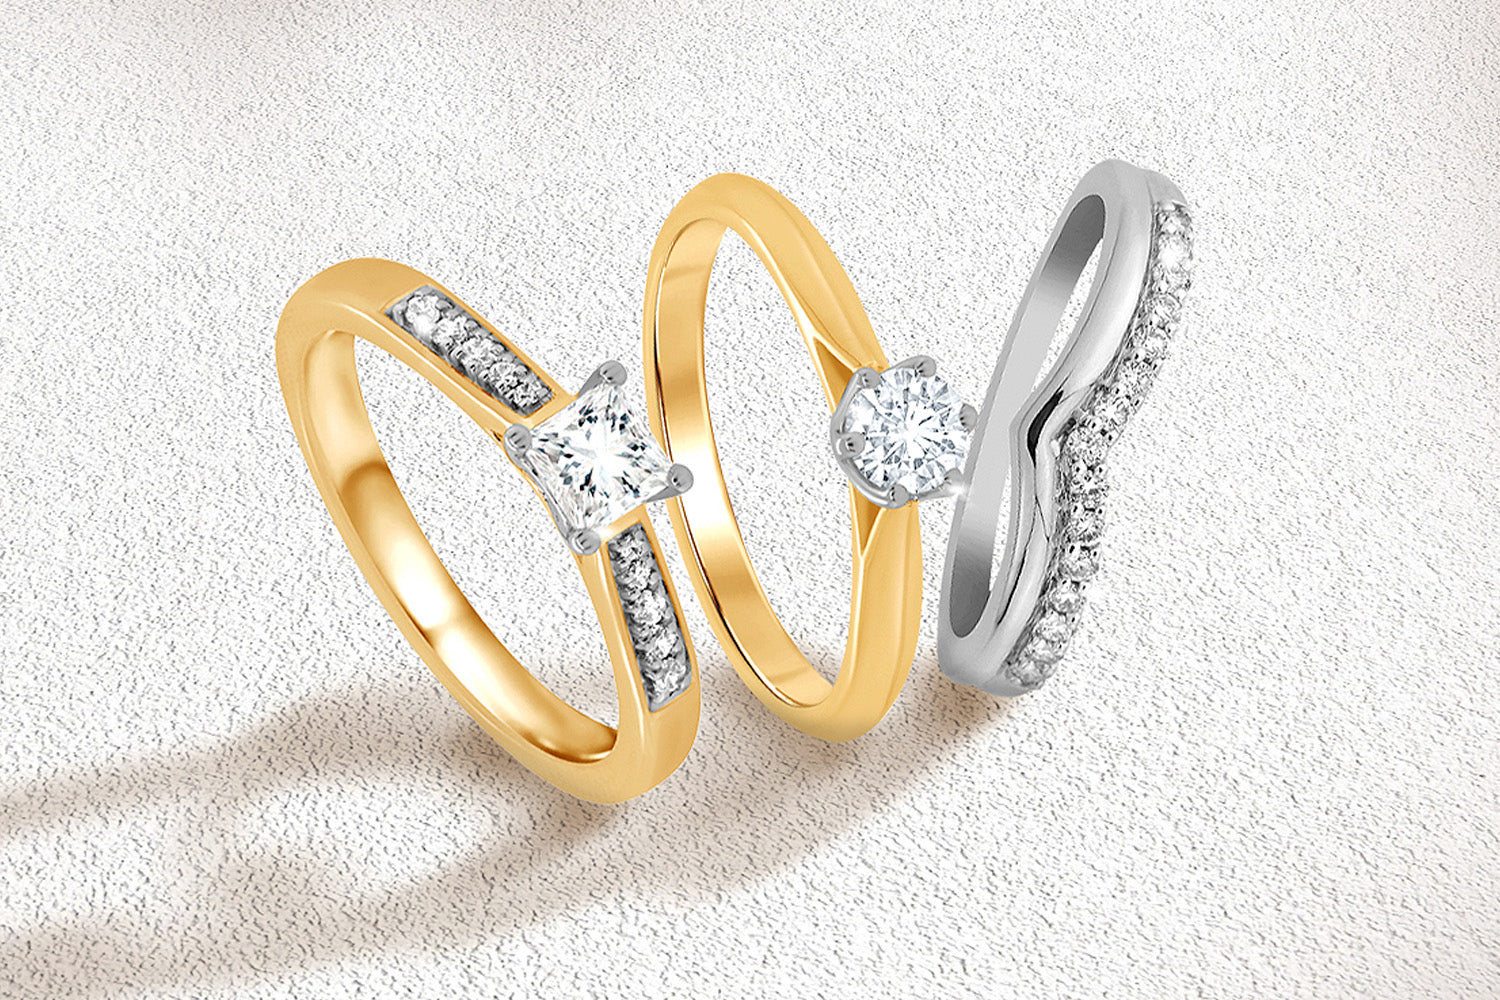 eas gold and platinum diamond engagement rings mobile